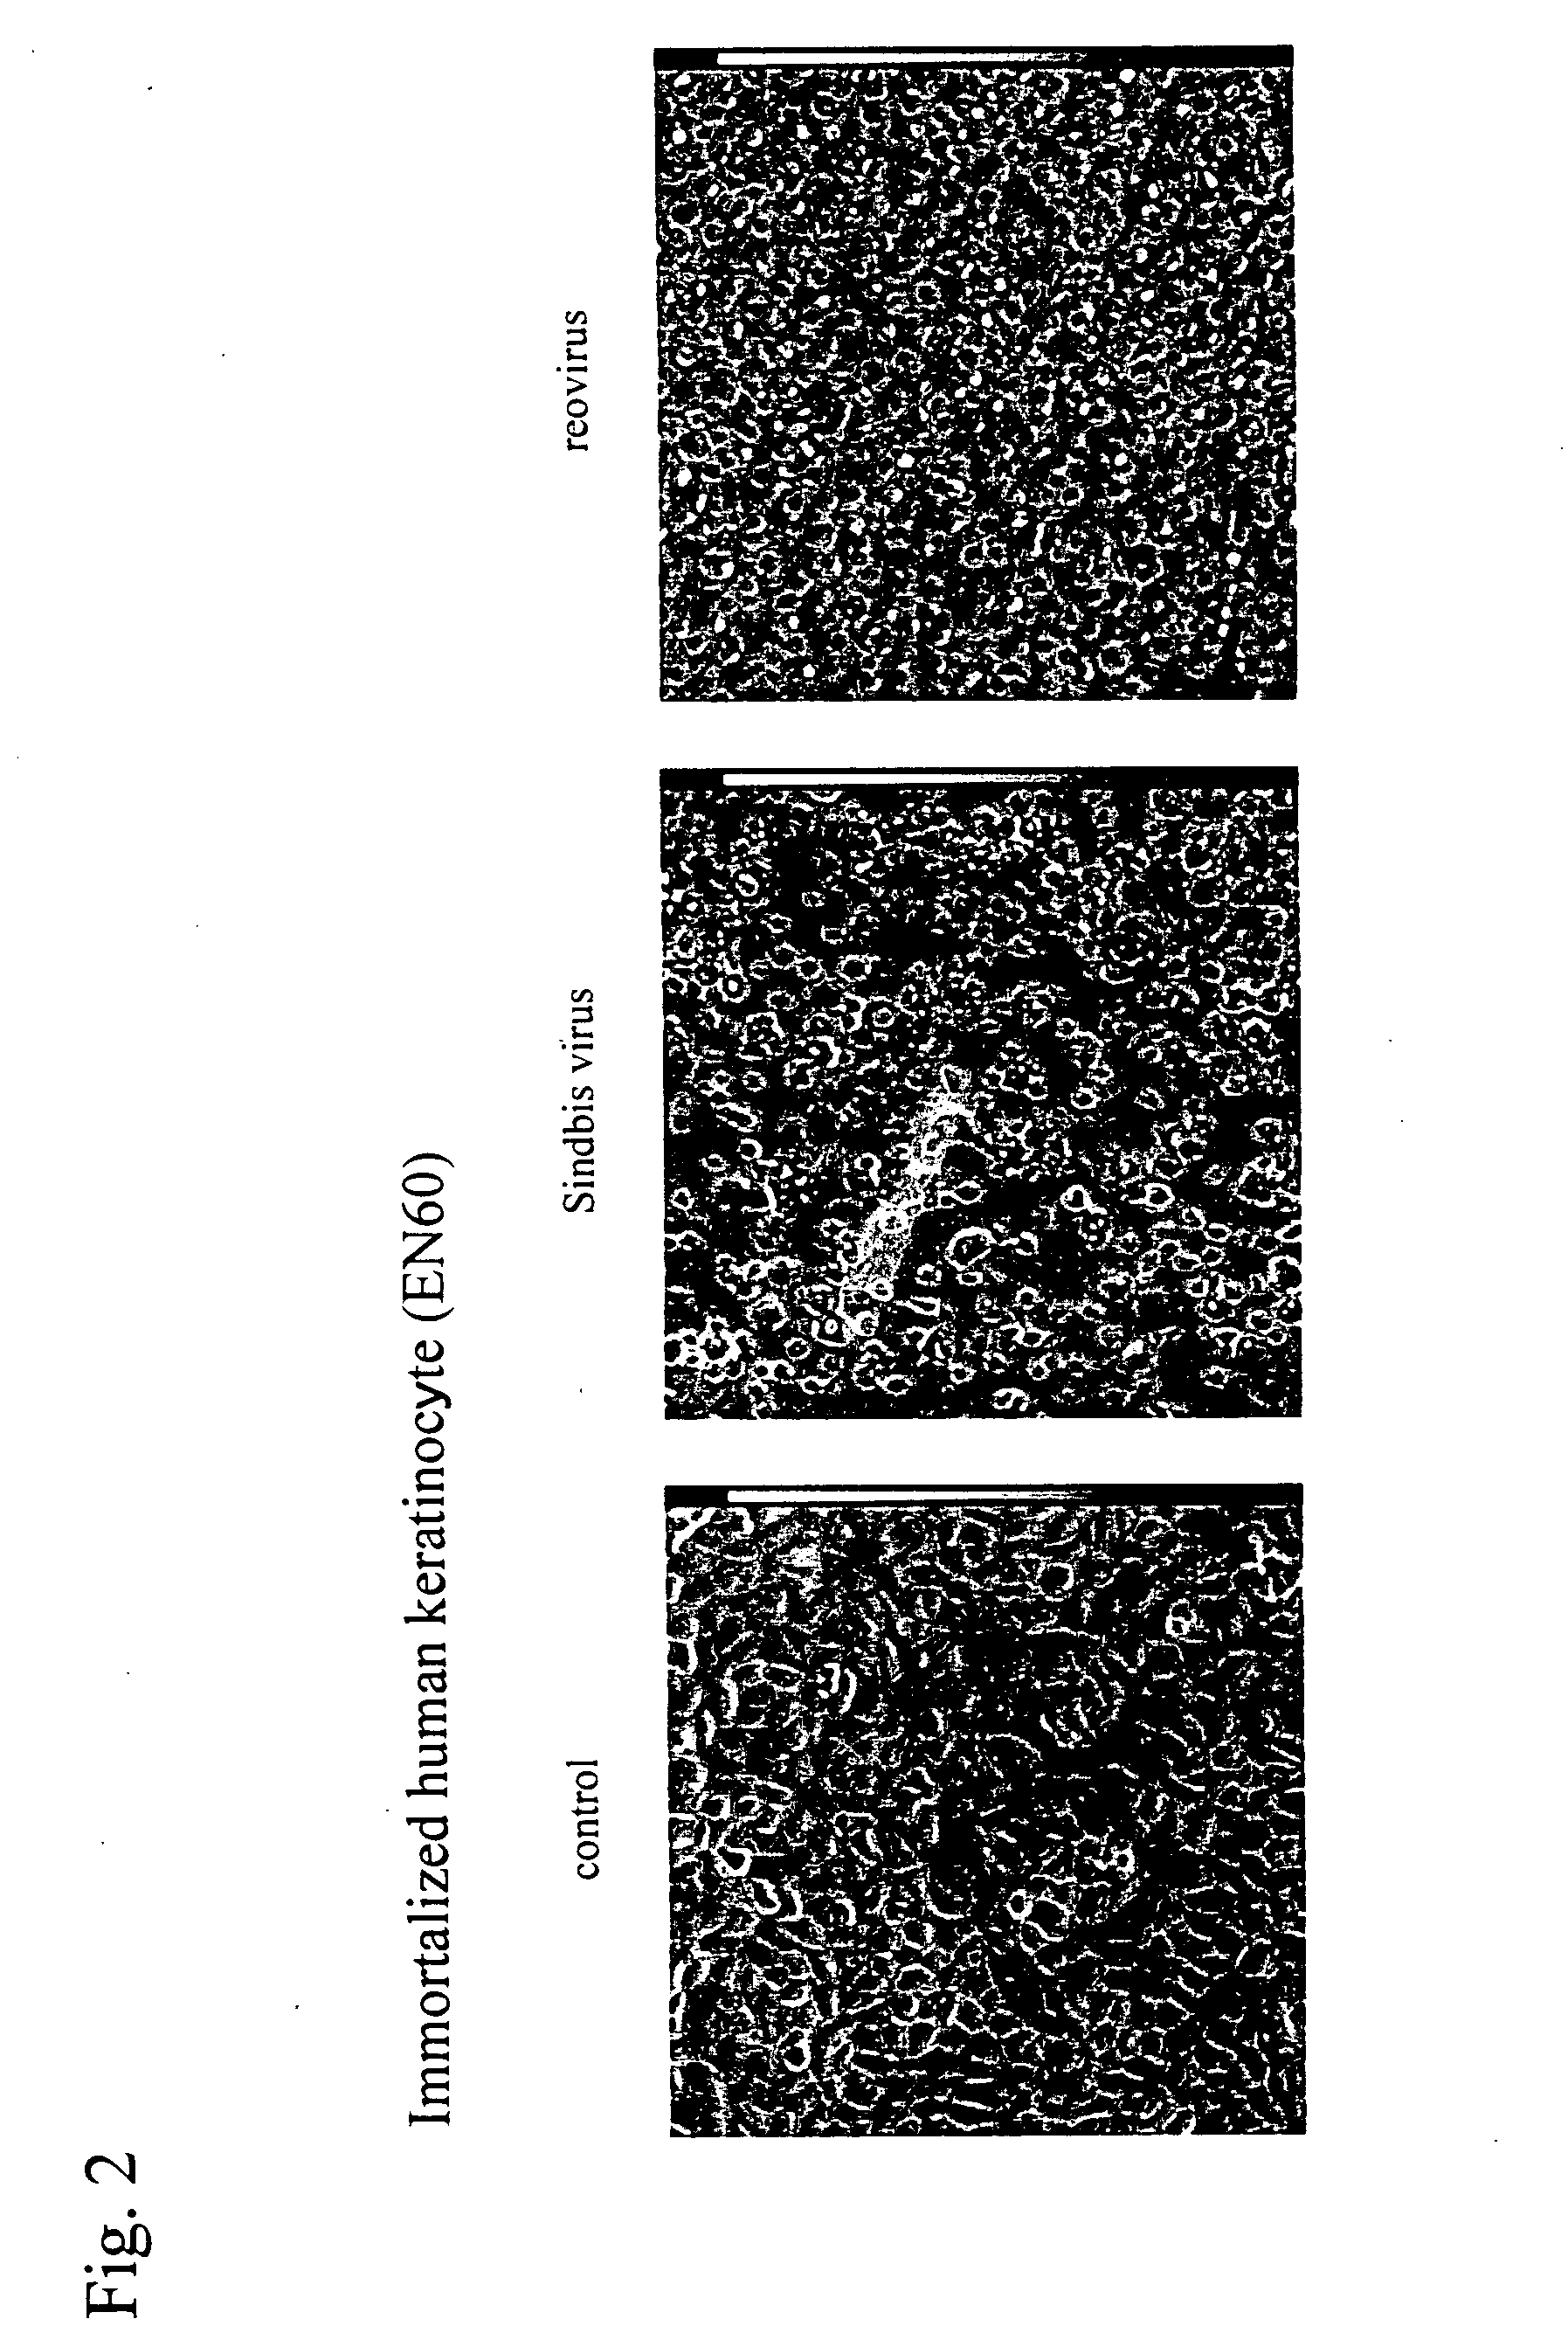 Pharmaceutical composition for treatment of cancers